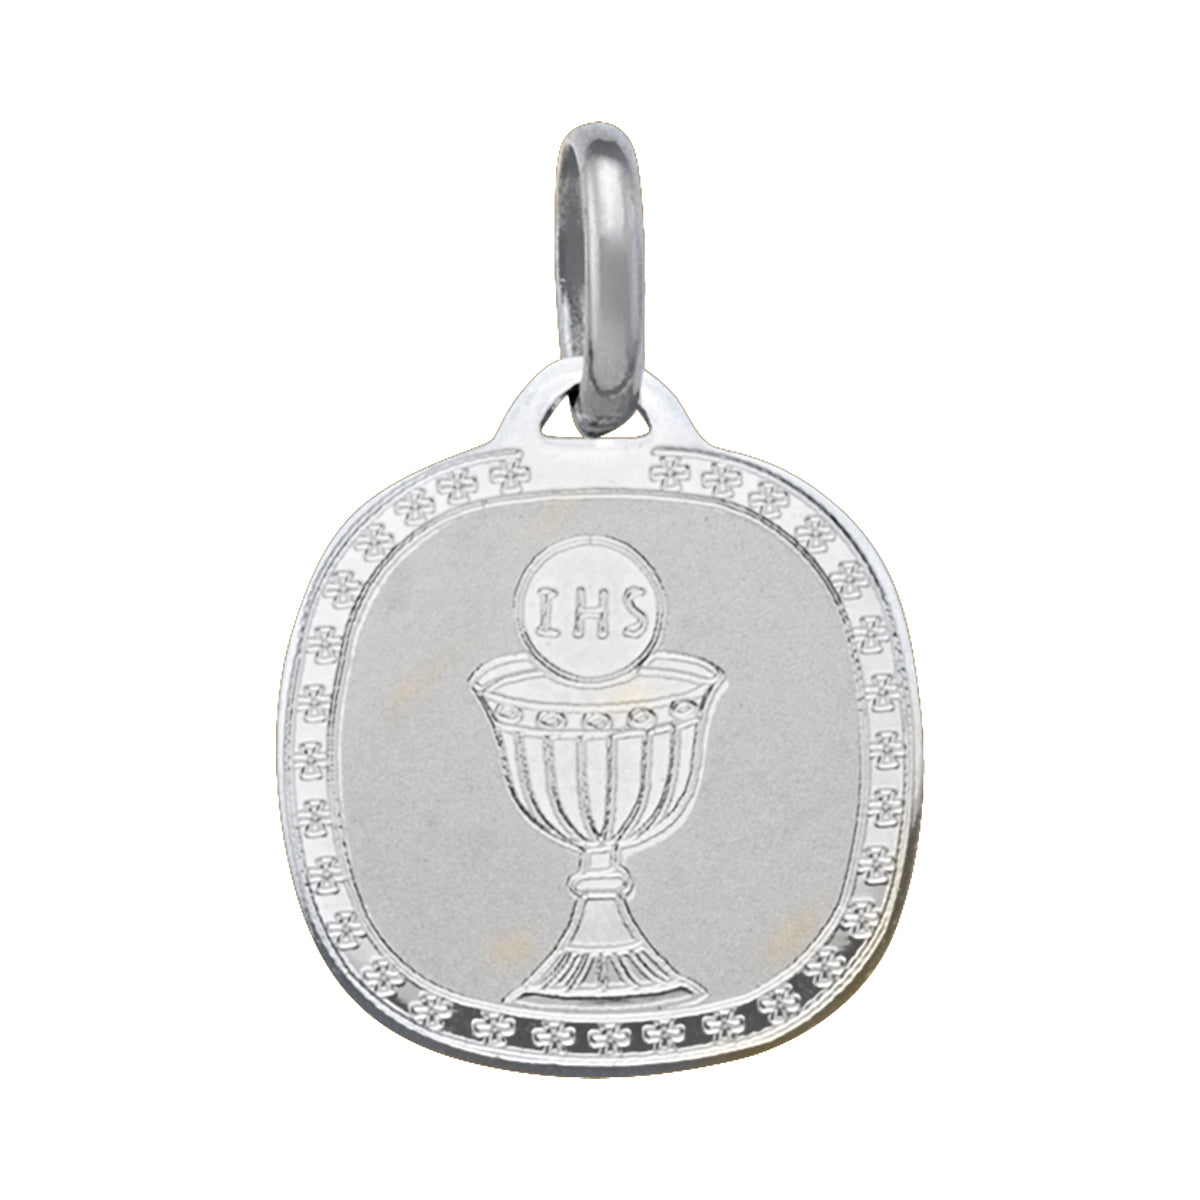 COMMUNION MEDAL WHITE GOLD SOLID